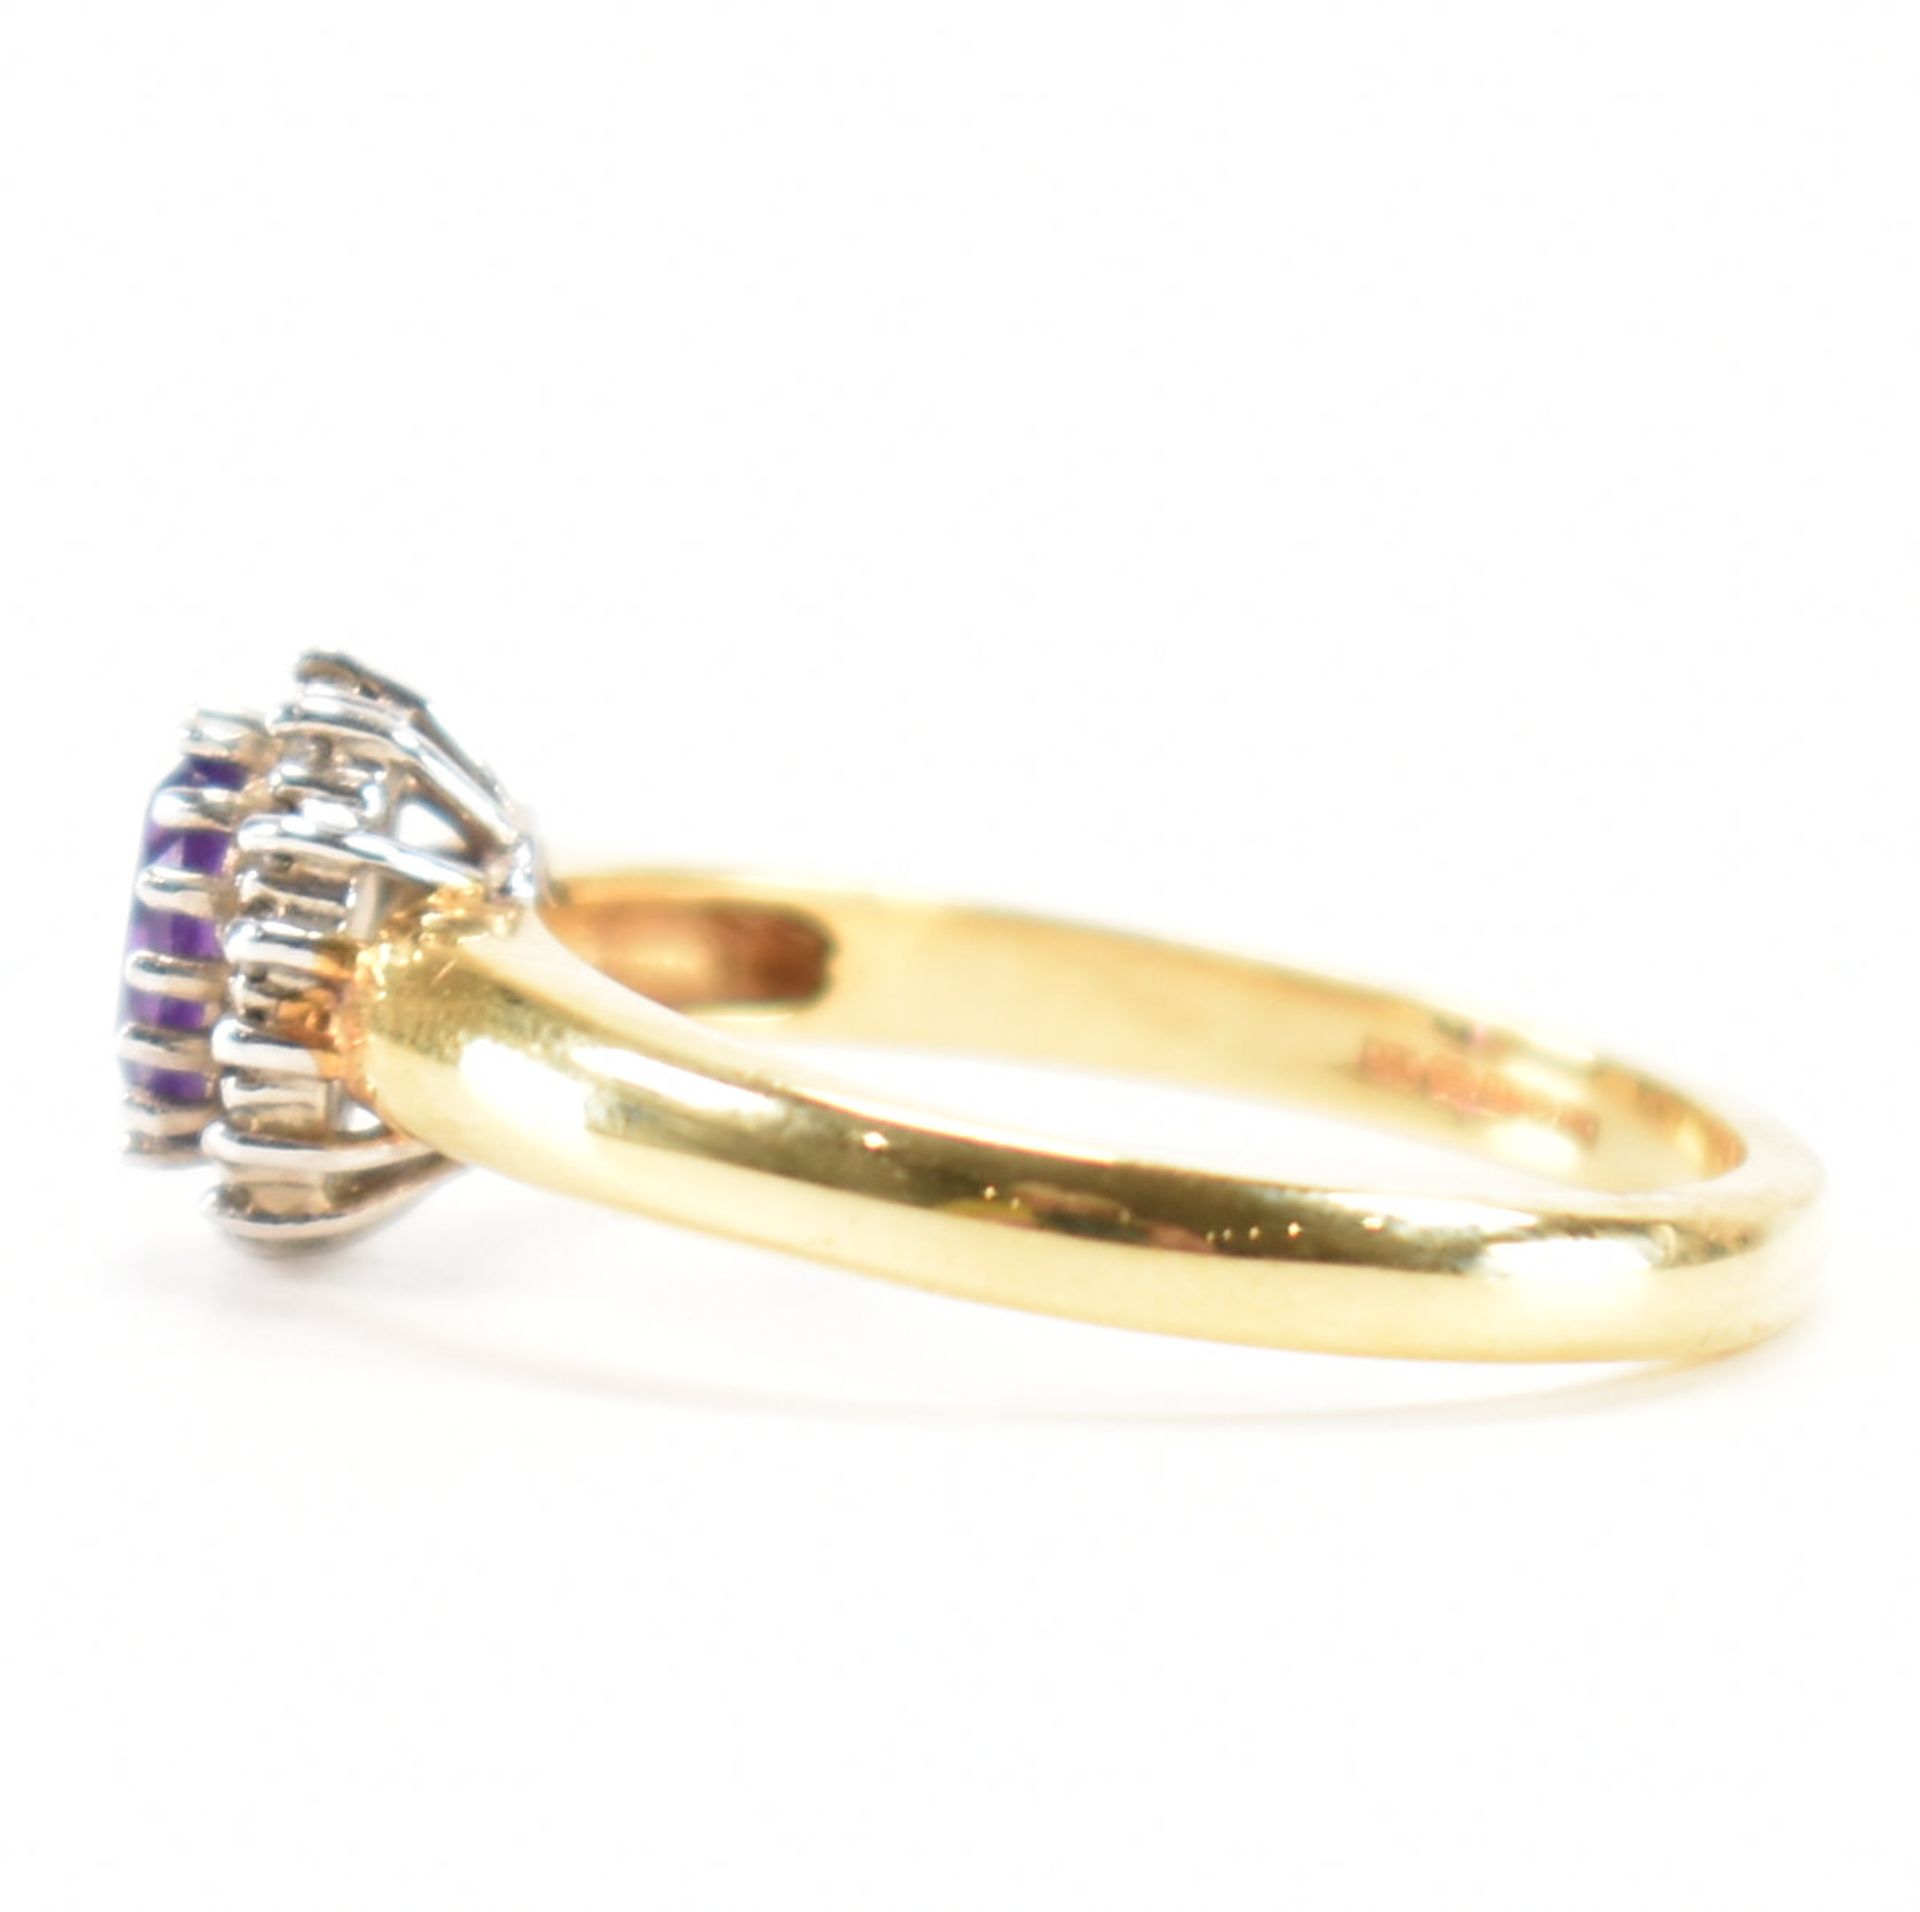 HALLMARKED 18CT GOLD & DIAMOND CLUSTER RING - Image 2 of 8